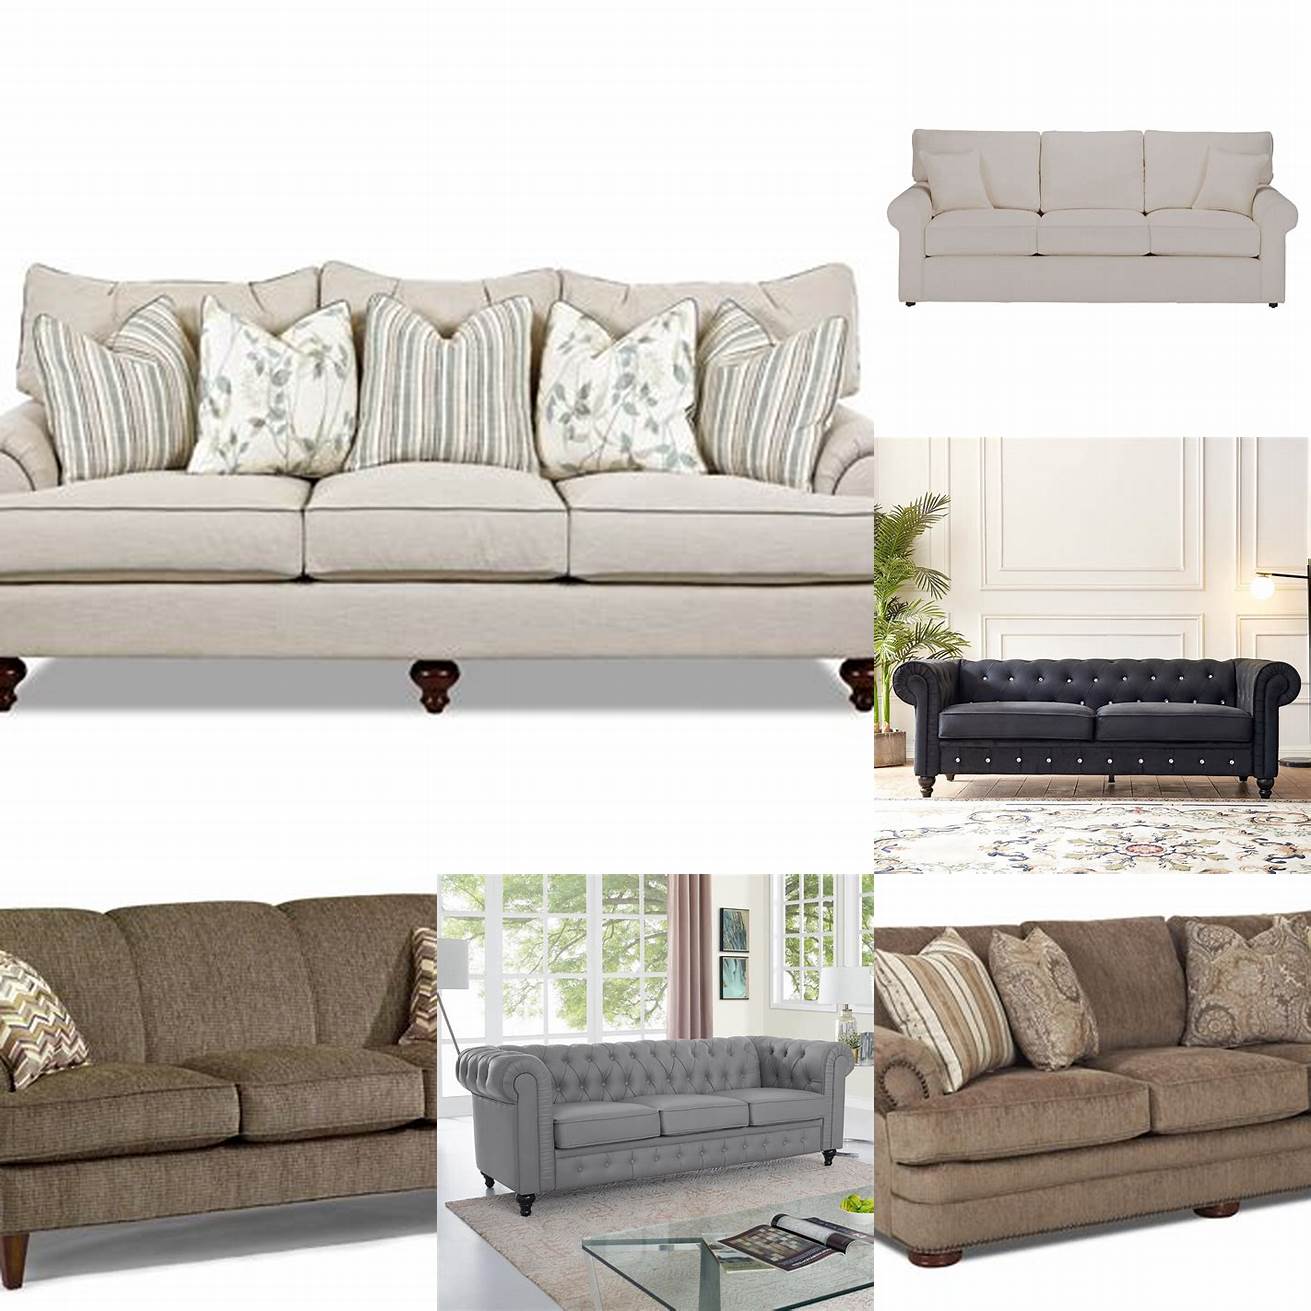 Exceptional comfort thanks to the deep cushions and rolled arms